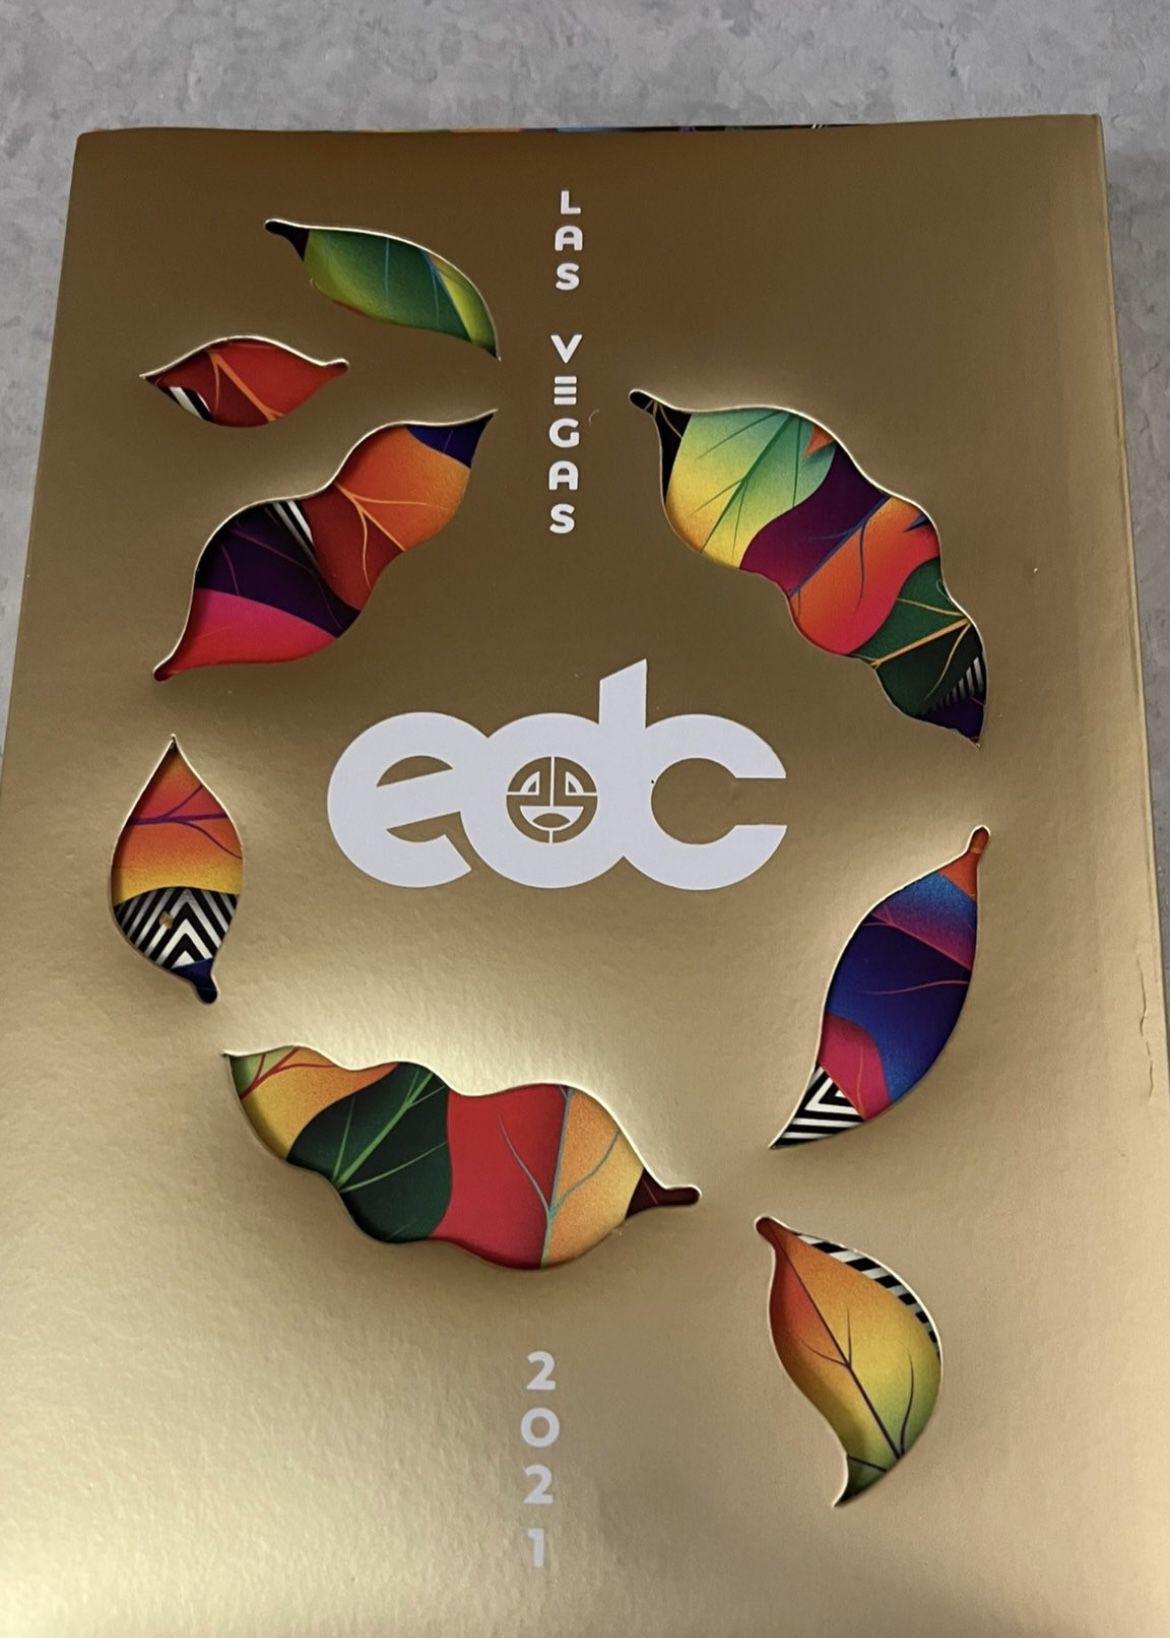 EDC TICKET FOR SALE $150